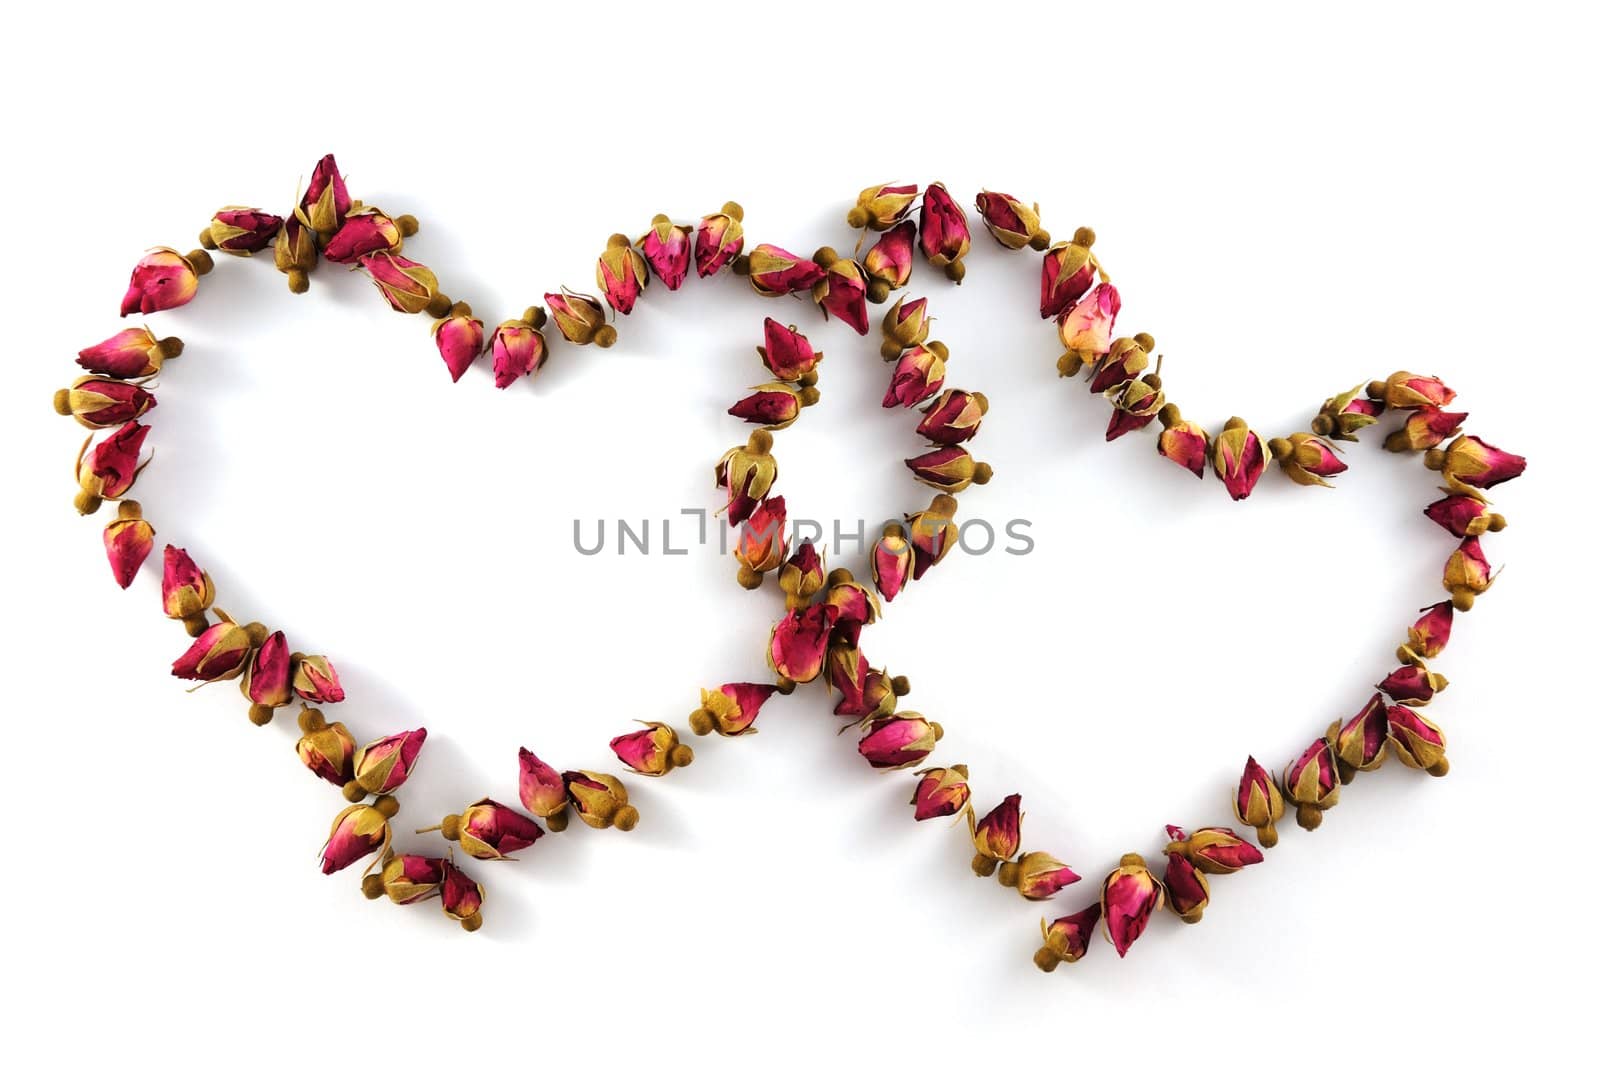 Two heart symbols made of dried flowers on white background